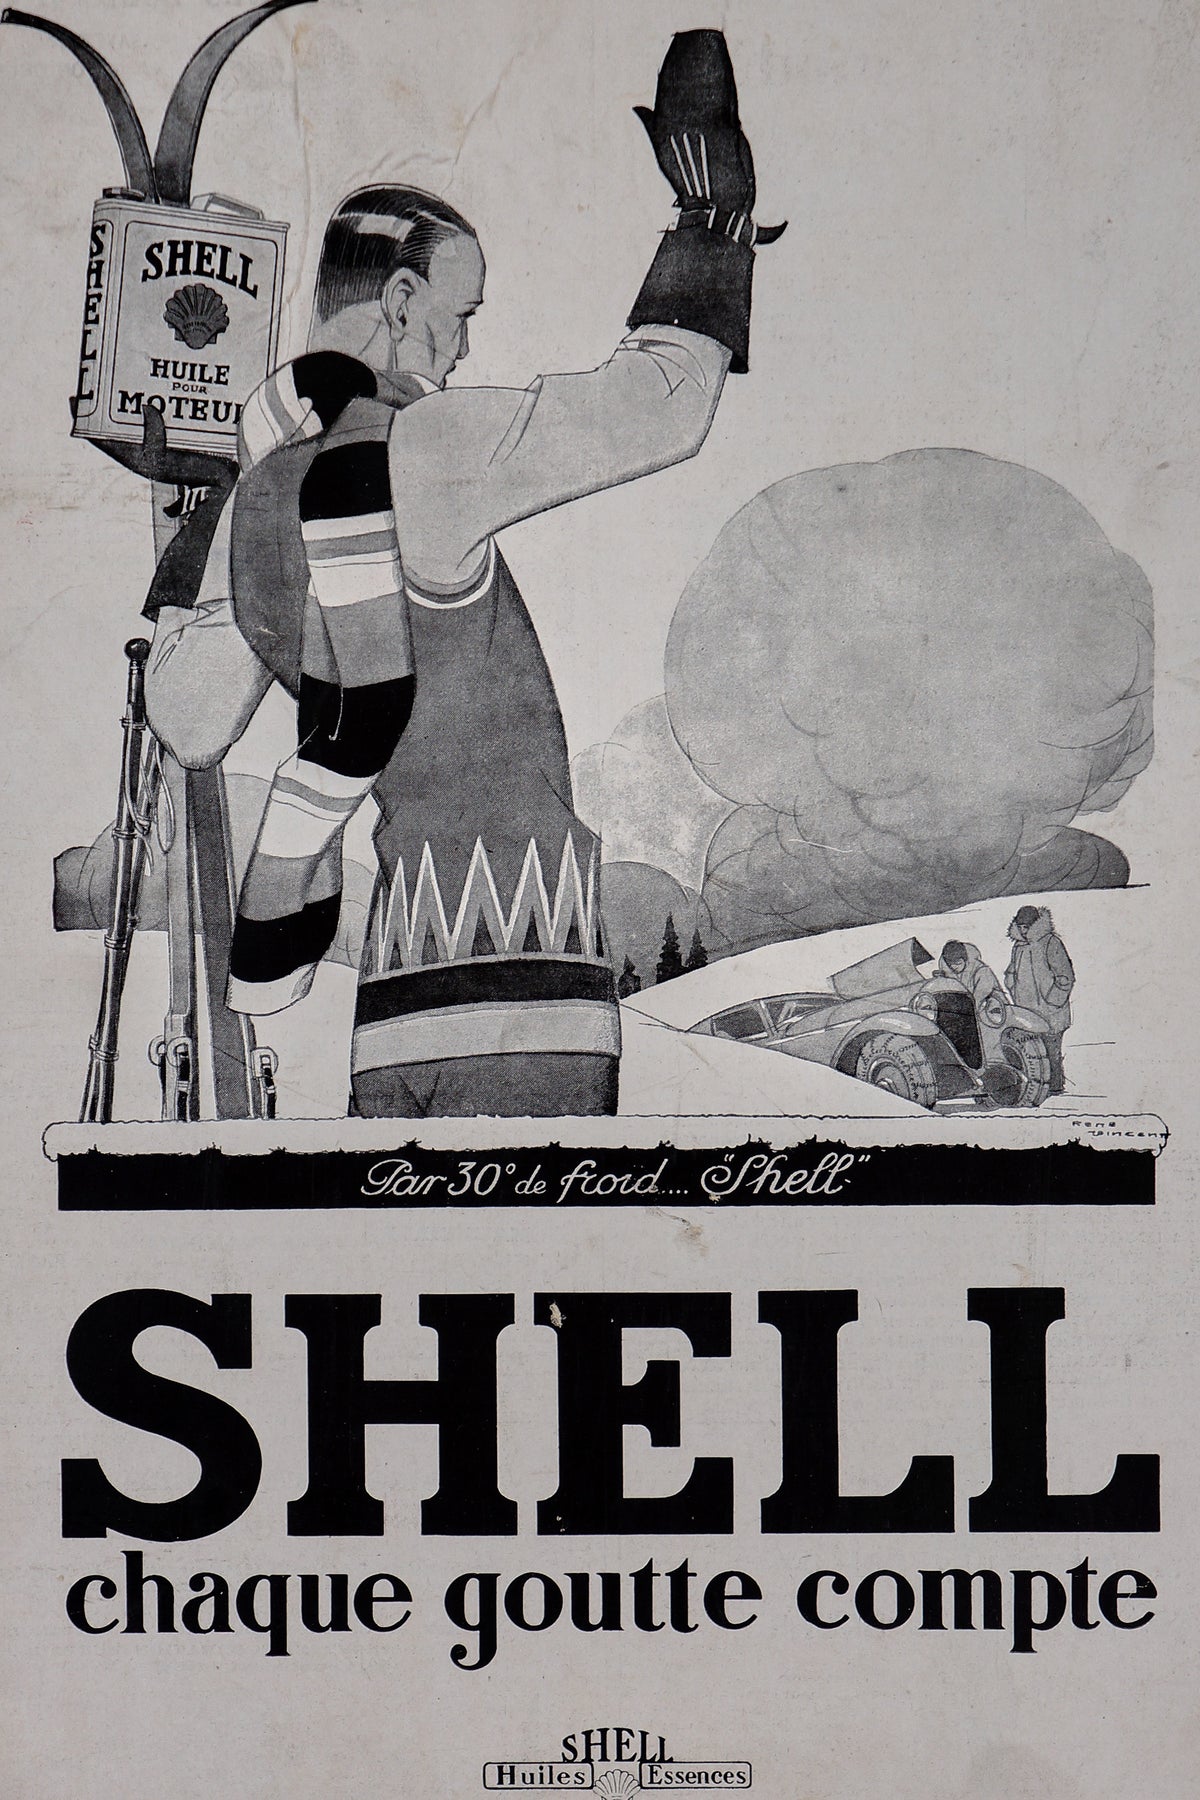 Shell- Every Drop Counts - Authentic Vintage Poster